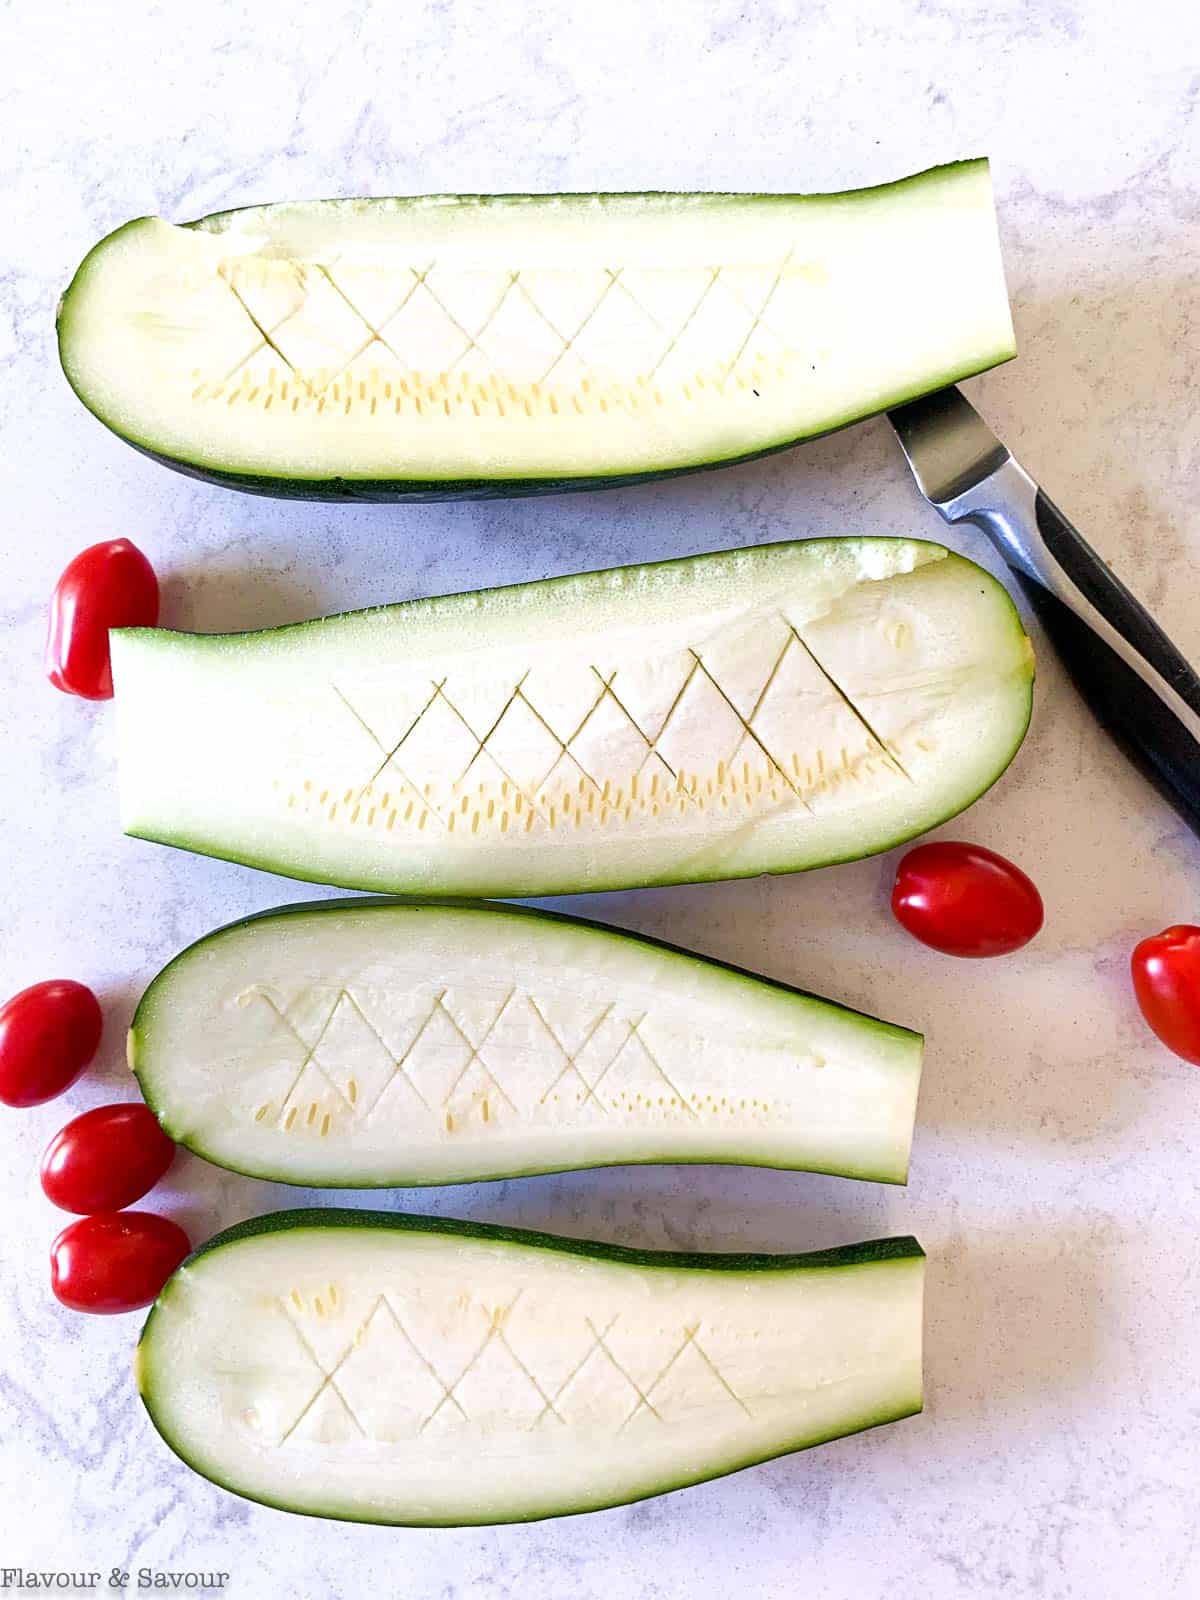 Zucchini halves scored with a sharp knife